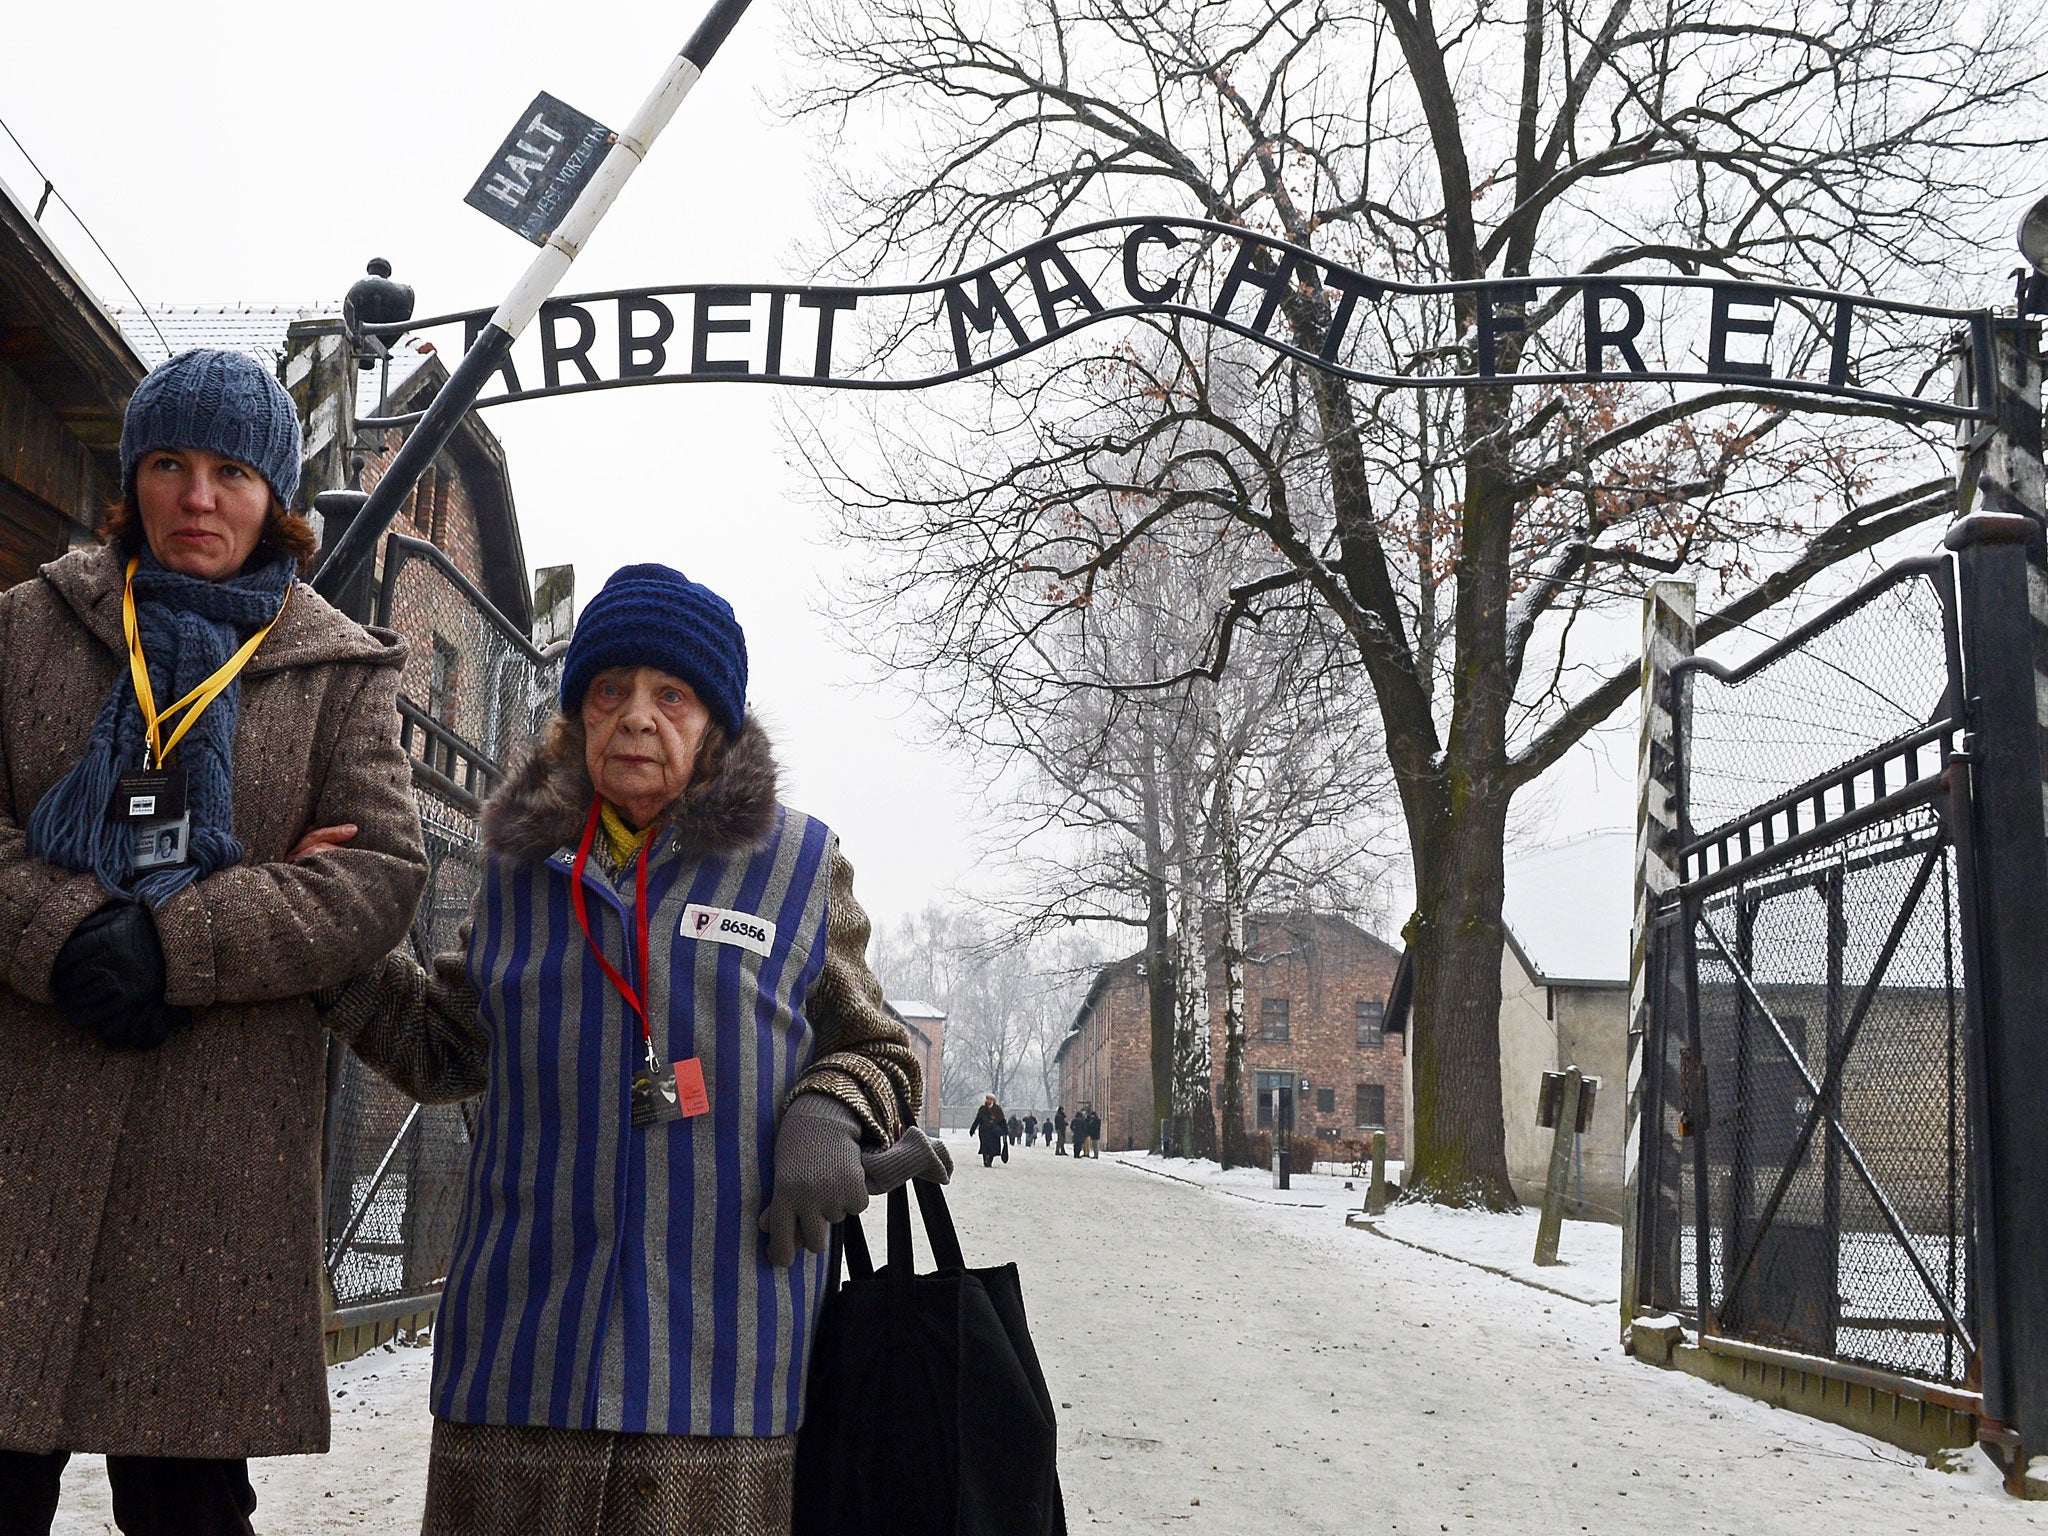 A former concentration camp prisoner attends a ceremony at the memorial site of the former Nazi concentration camp Auschwitz-Birkenau in Oswiecim, Poland, on Holocaust Day.